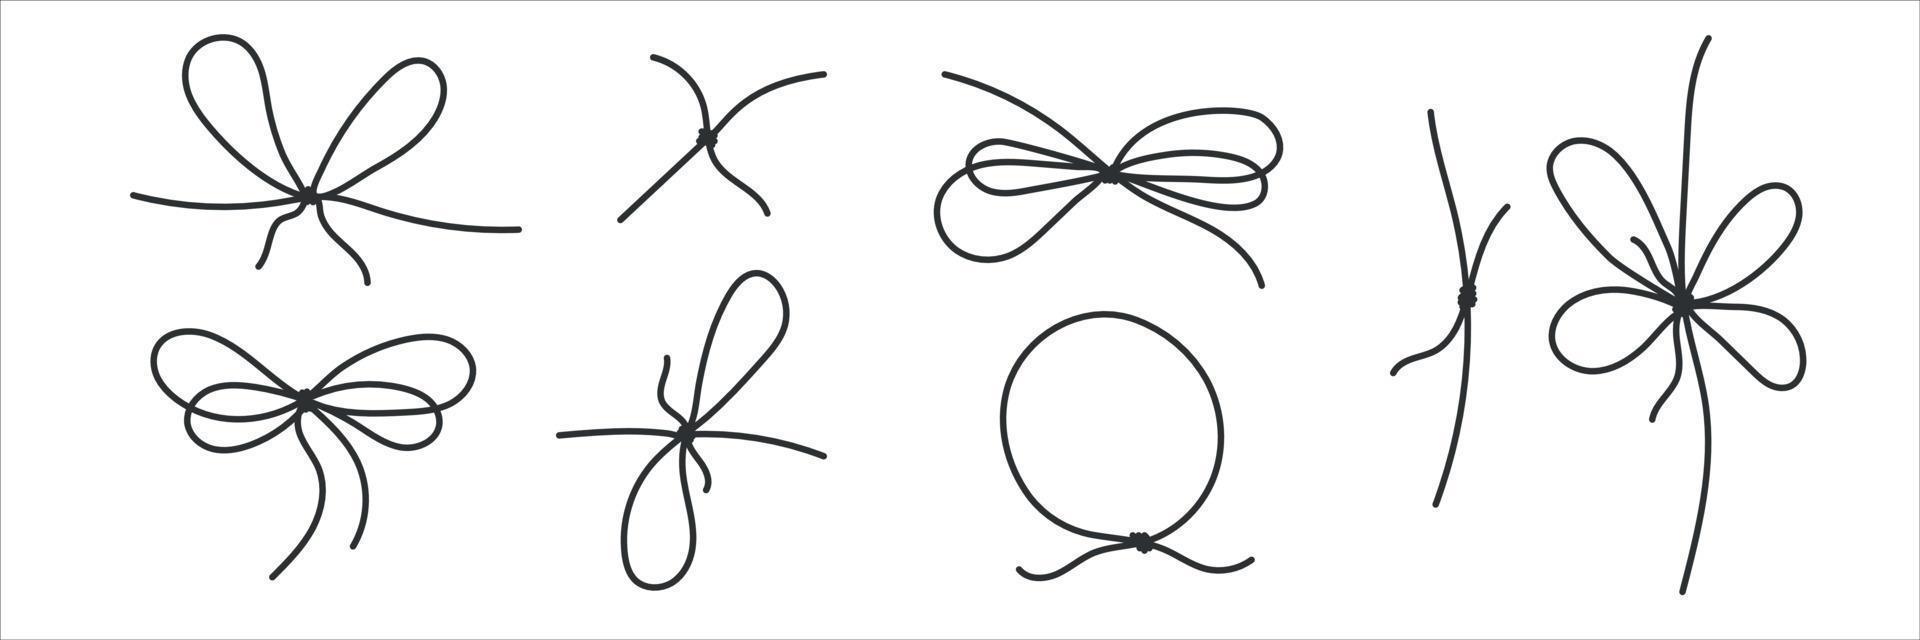 Lace bows or bow knot sketch. Rope knots, marine knots. Vector illustration.